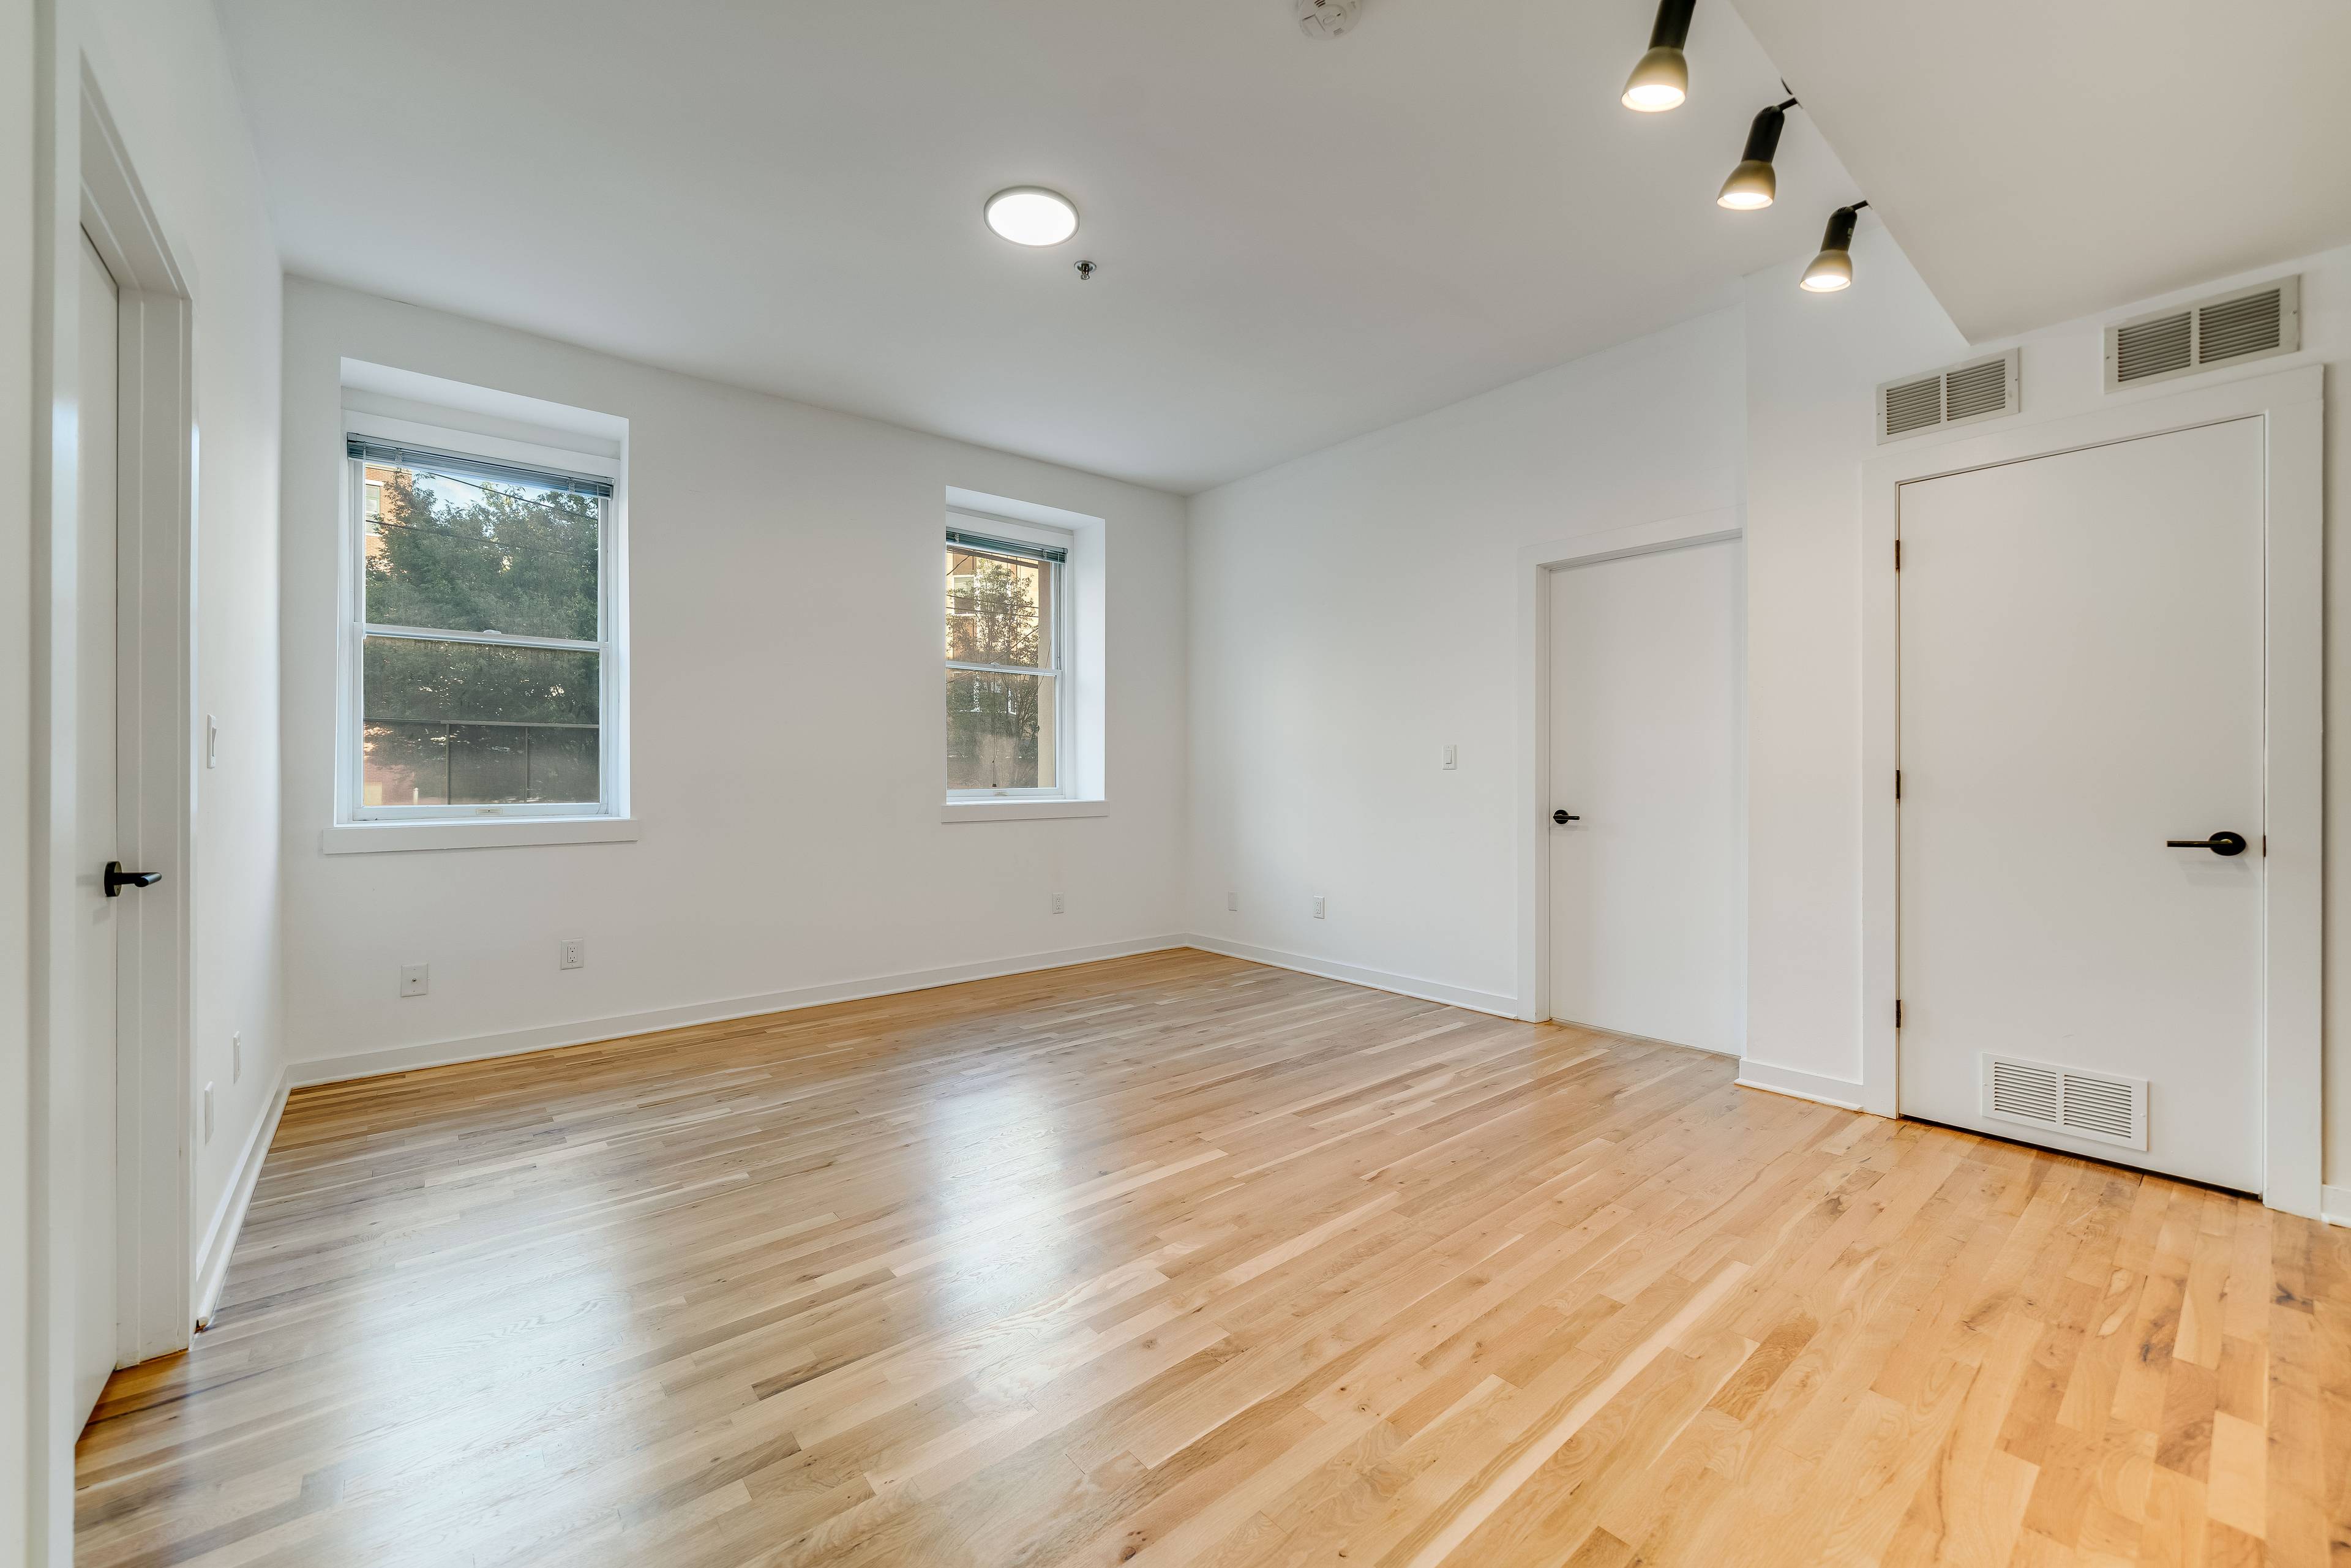 2 Bedroom Apartment now available at 716 Madison Street in Hoboken.  Laundry in Unit and On Site.  Central AC and Heat.  Parking Available On Site.